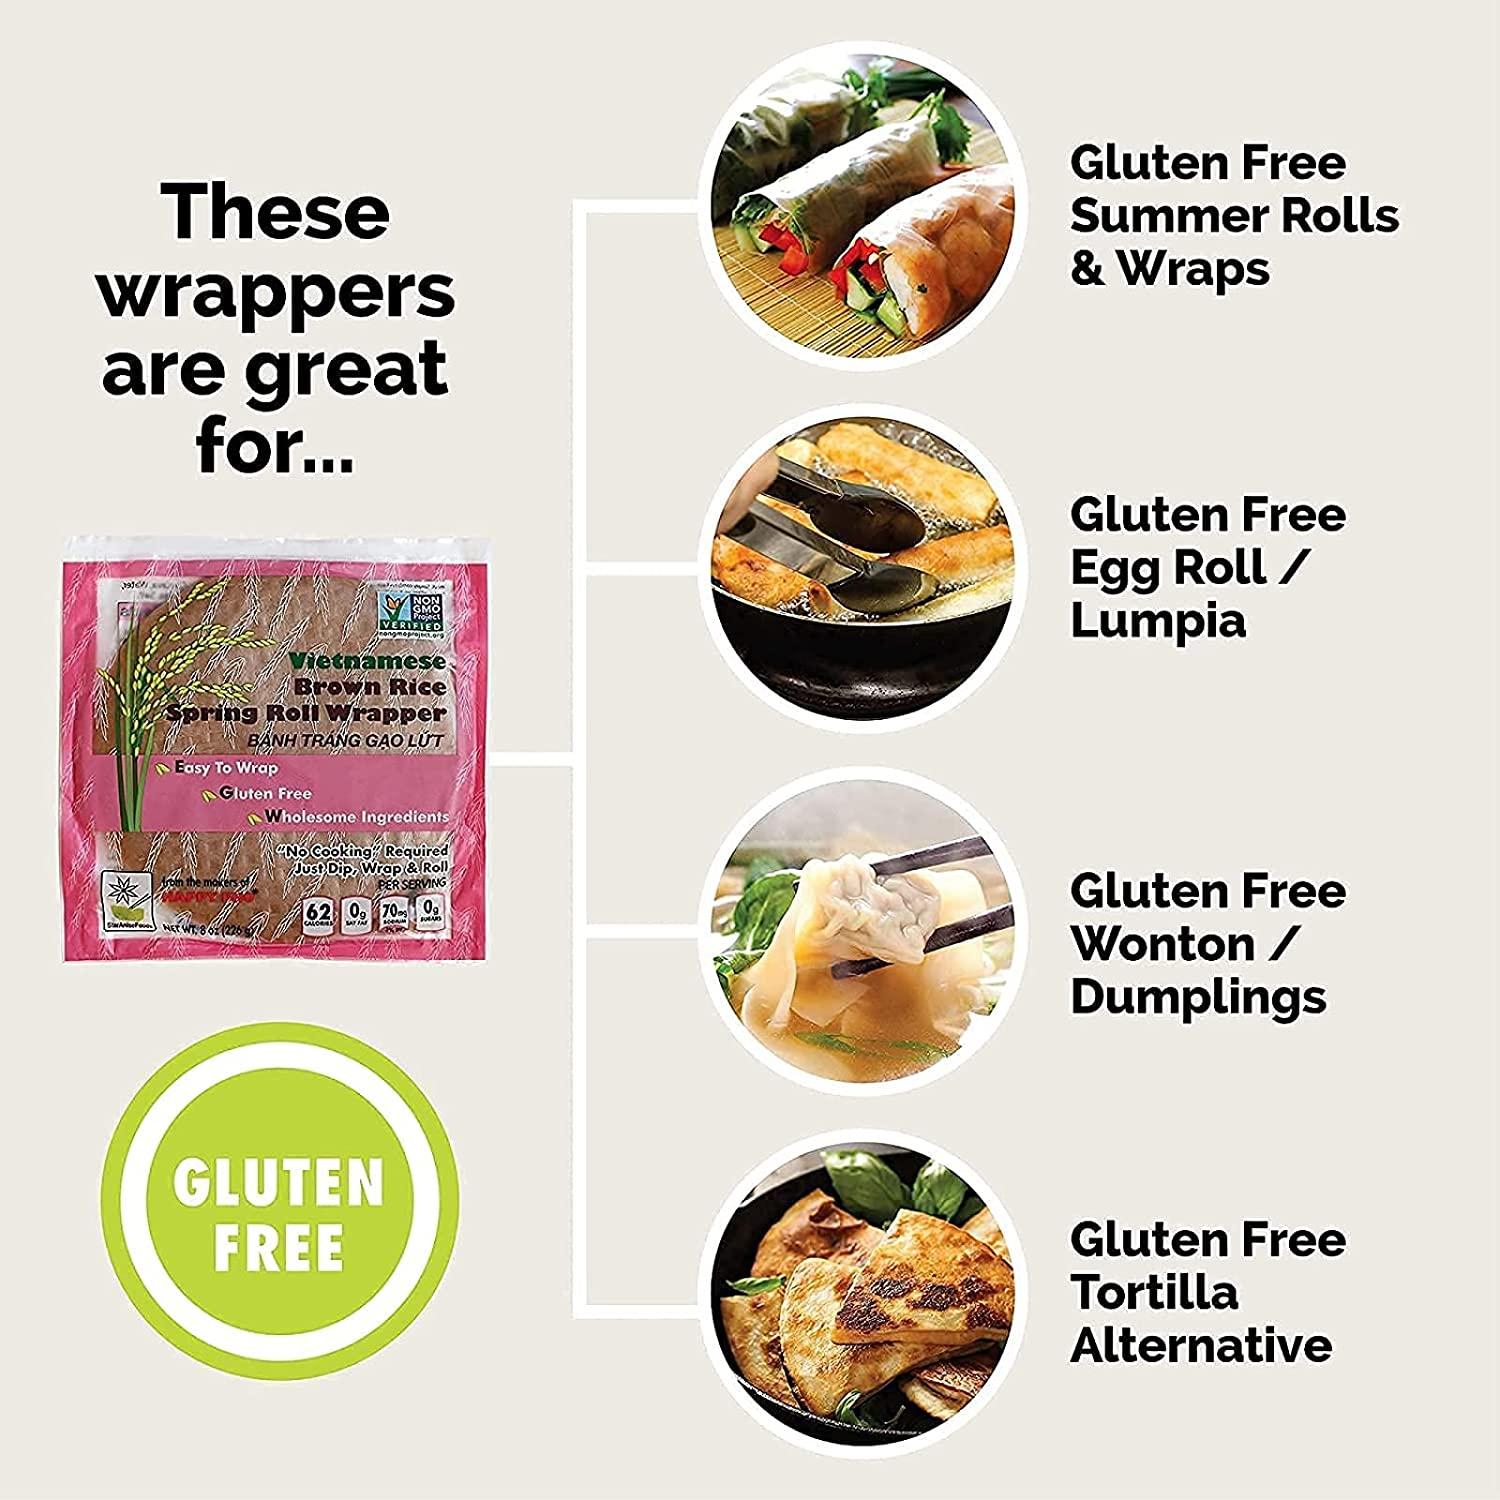 Star Anise Foods Gluten Free Rice Paper Wrappers for Spring Rolls, Egg Roll  Wrappers, Wonton Wrappers, 135 Wrappers / 48 Oz, 8 Oz. Per Bag, Pack of